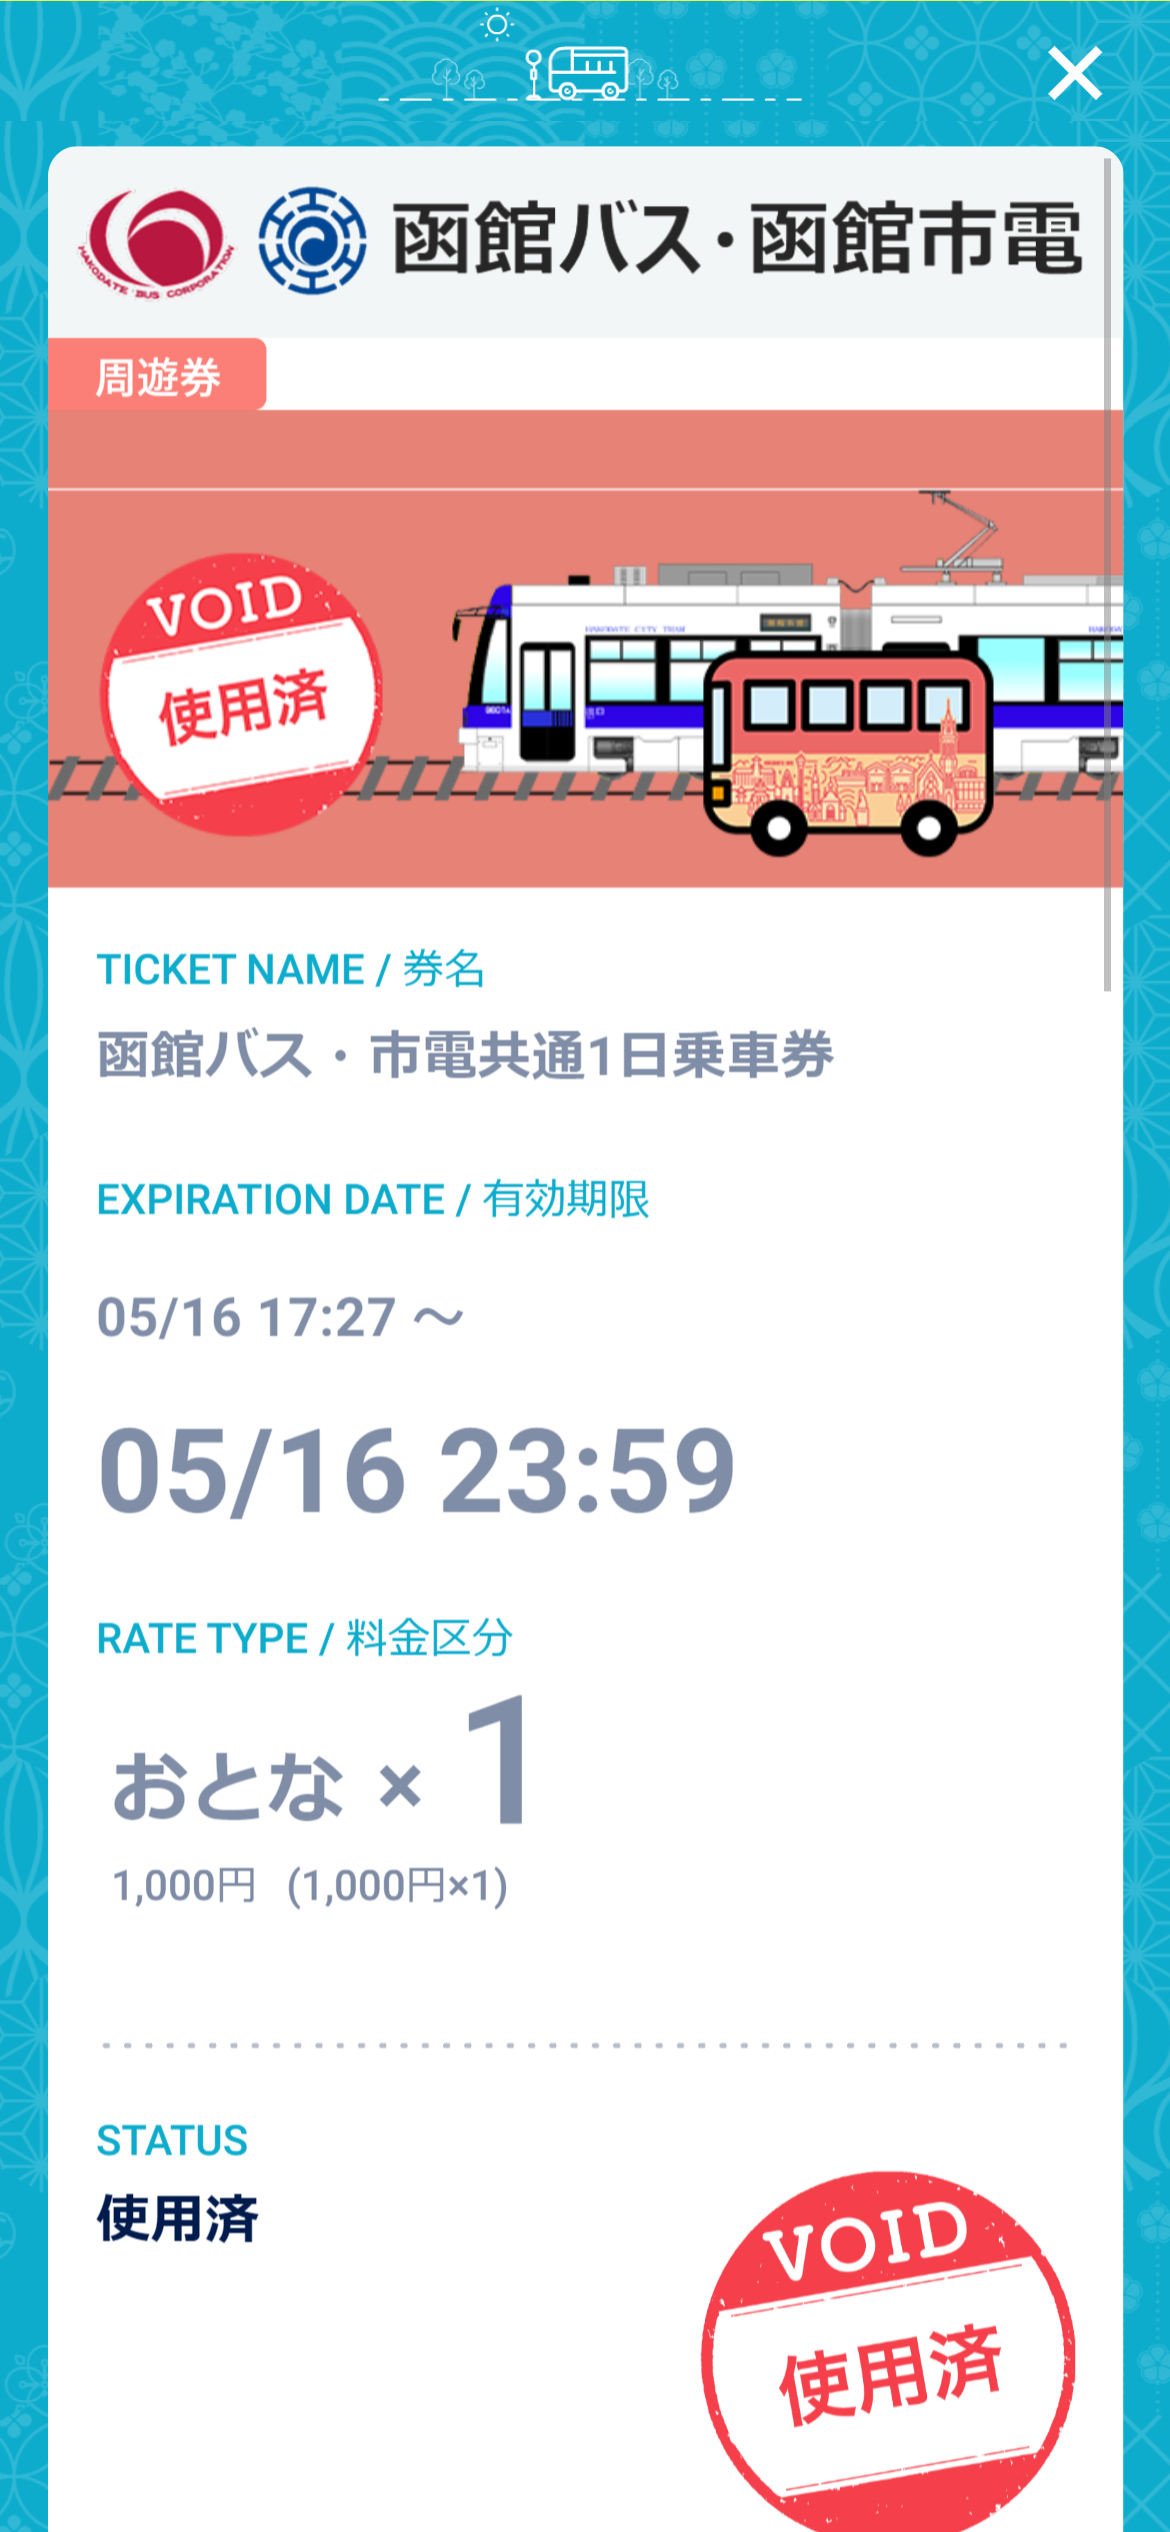 staging.cstm.dohna.jp_tabs_home(iPhone 12 Pro) (21).png